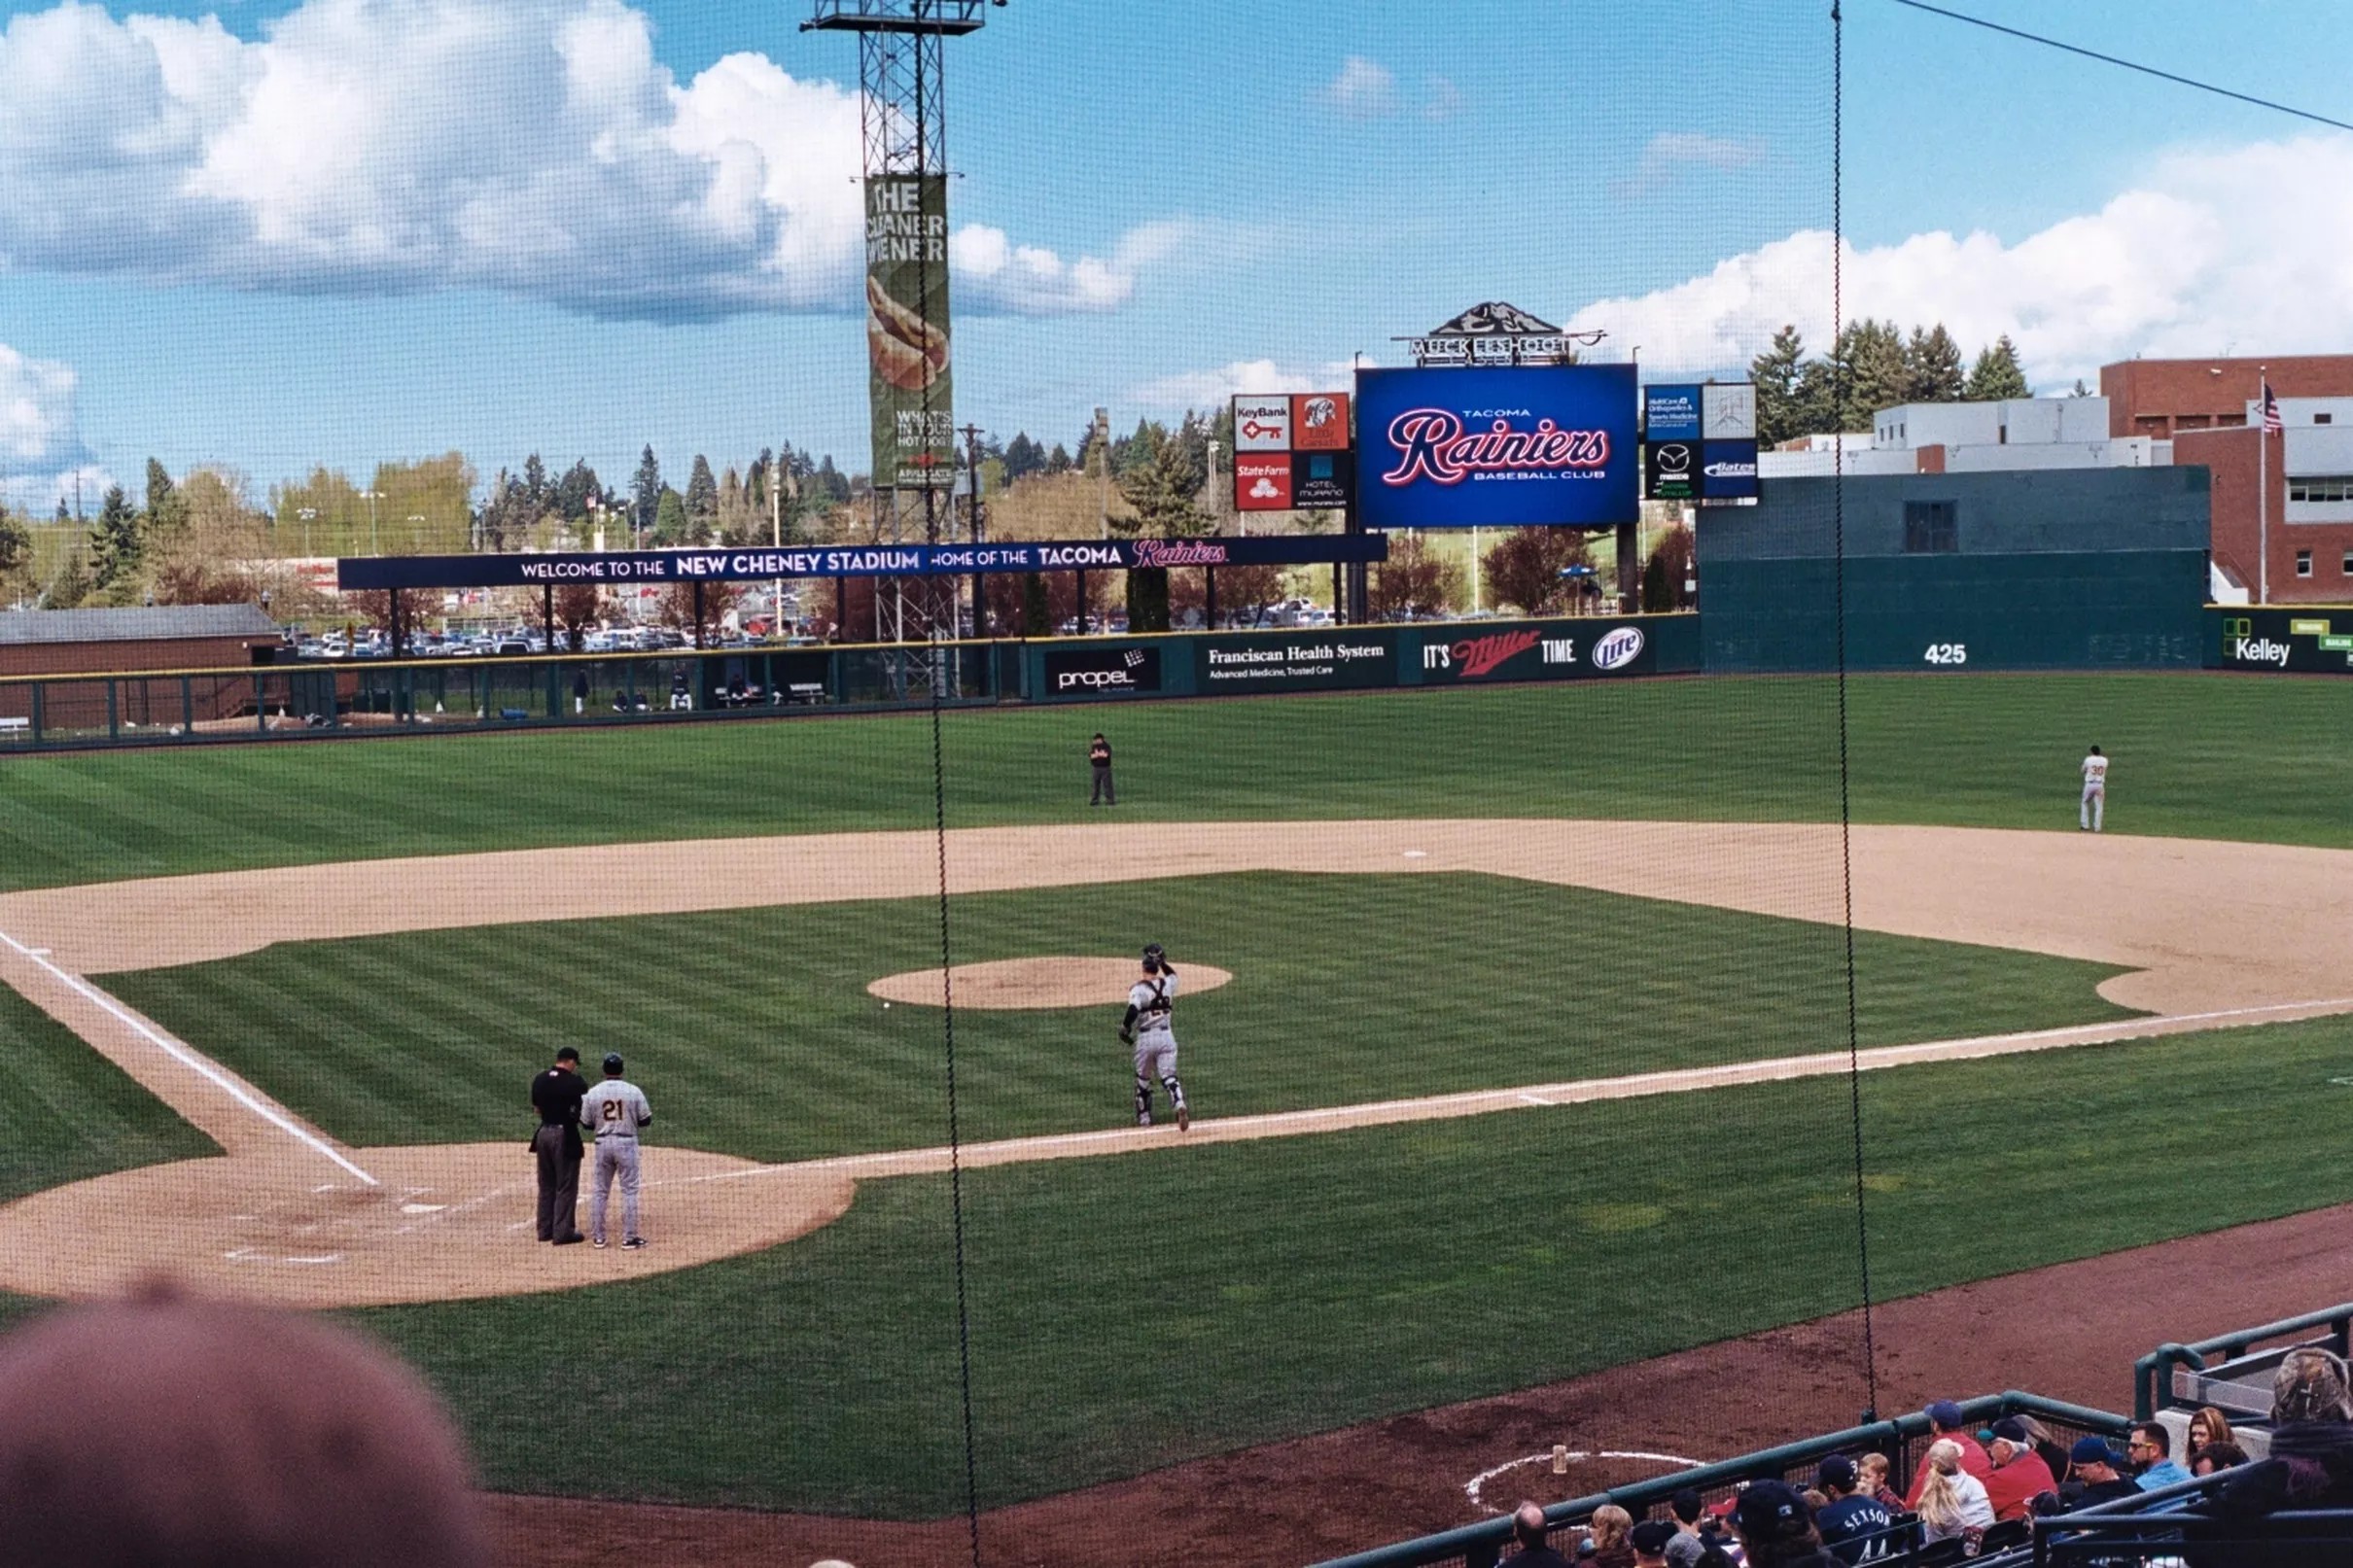 Get out to see the Rainiers a guide to make the most of your